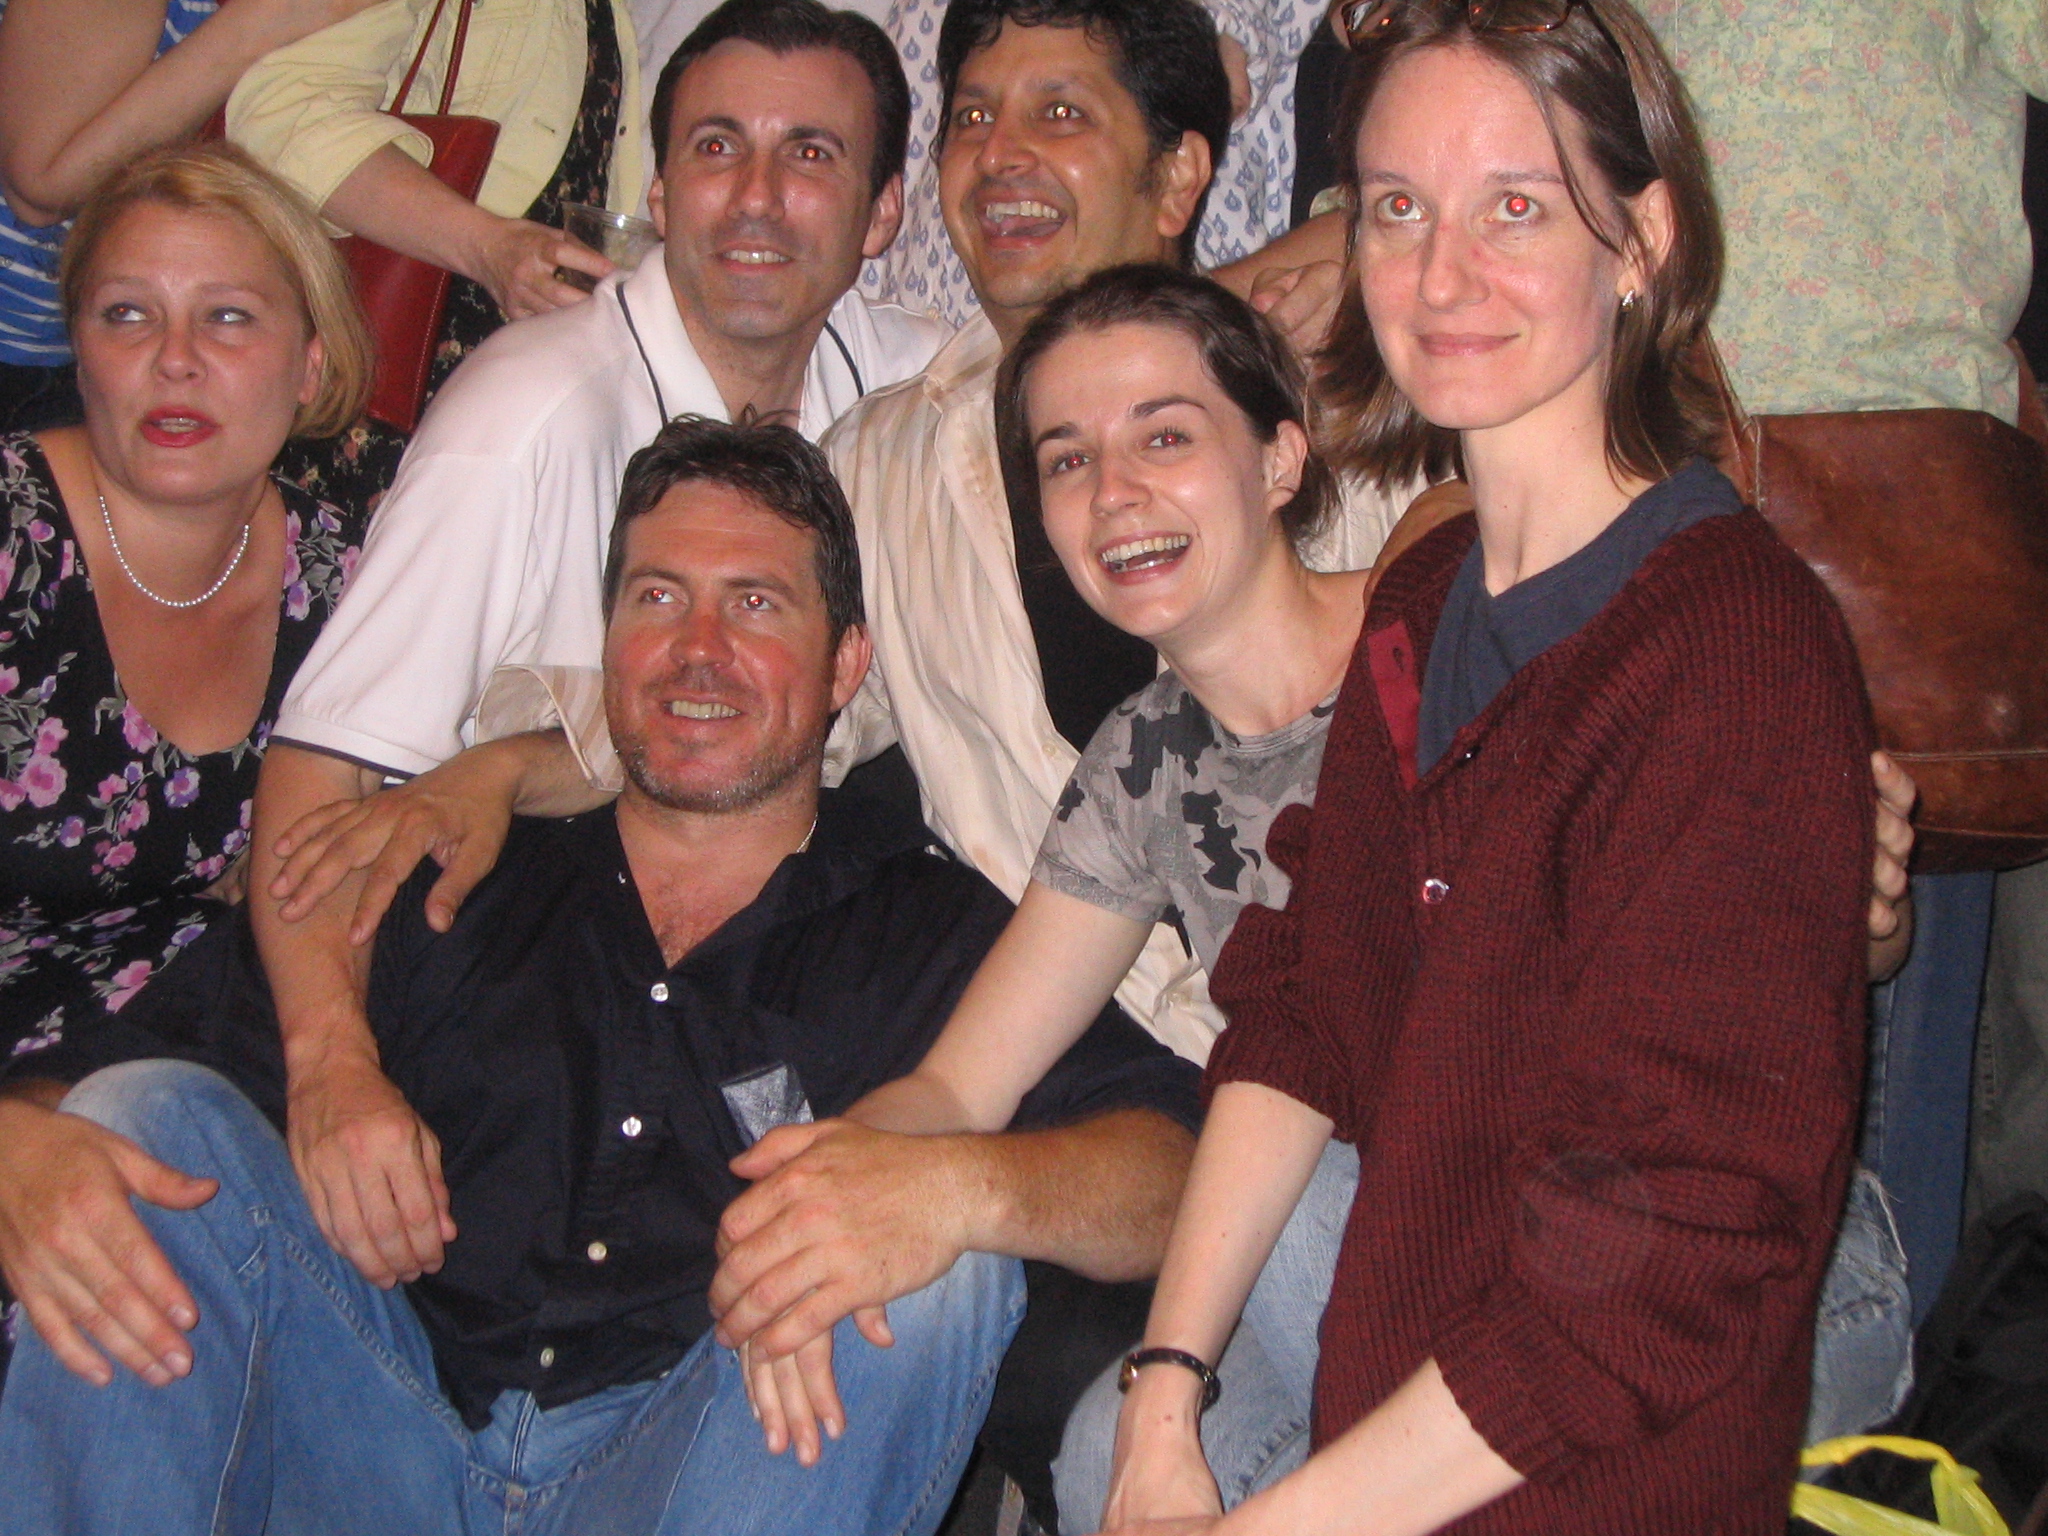 New York premiere of various plays: Daniela Dakich (HB Playwrights Foundation Theatre, 2006).